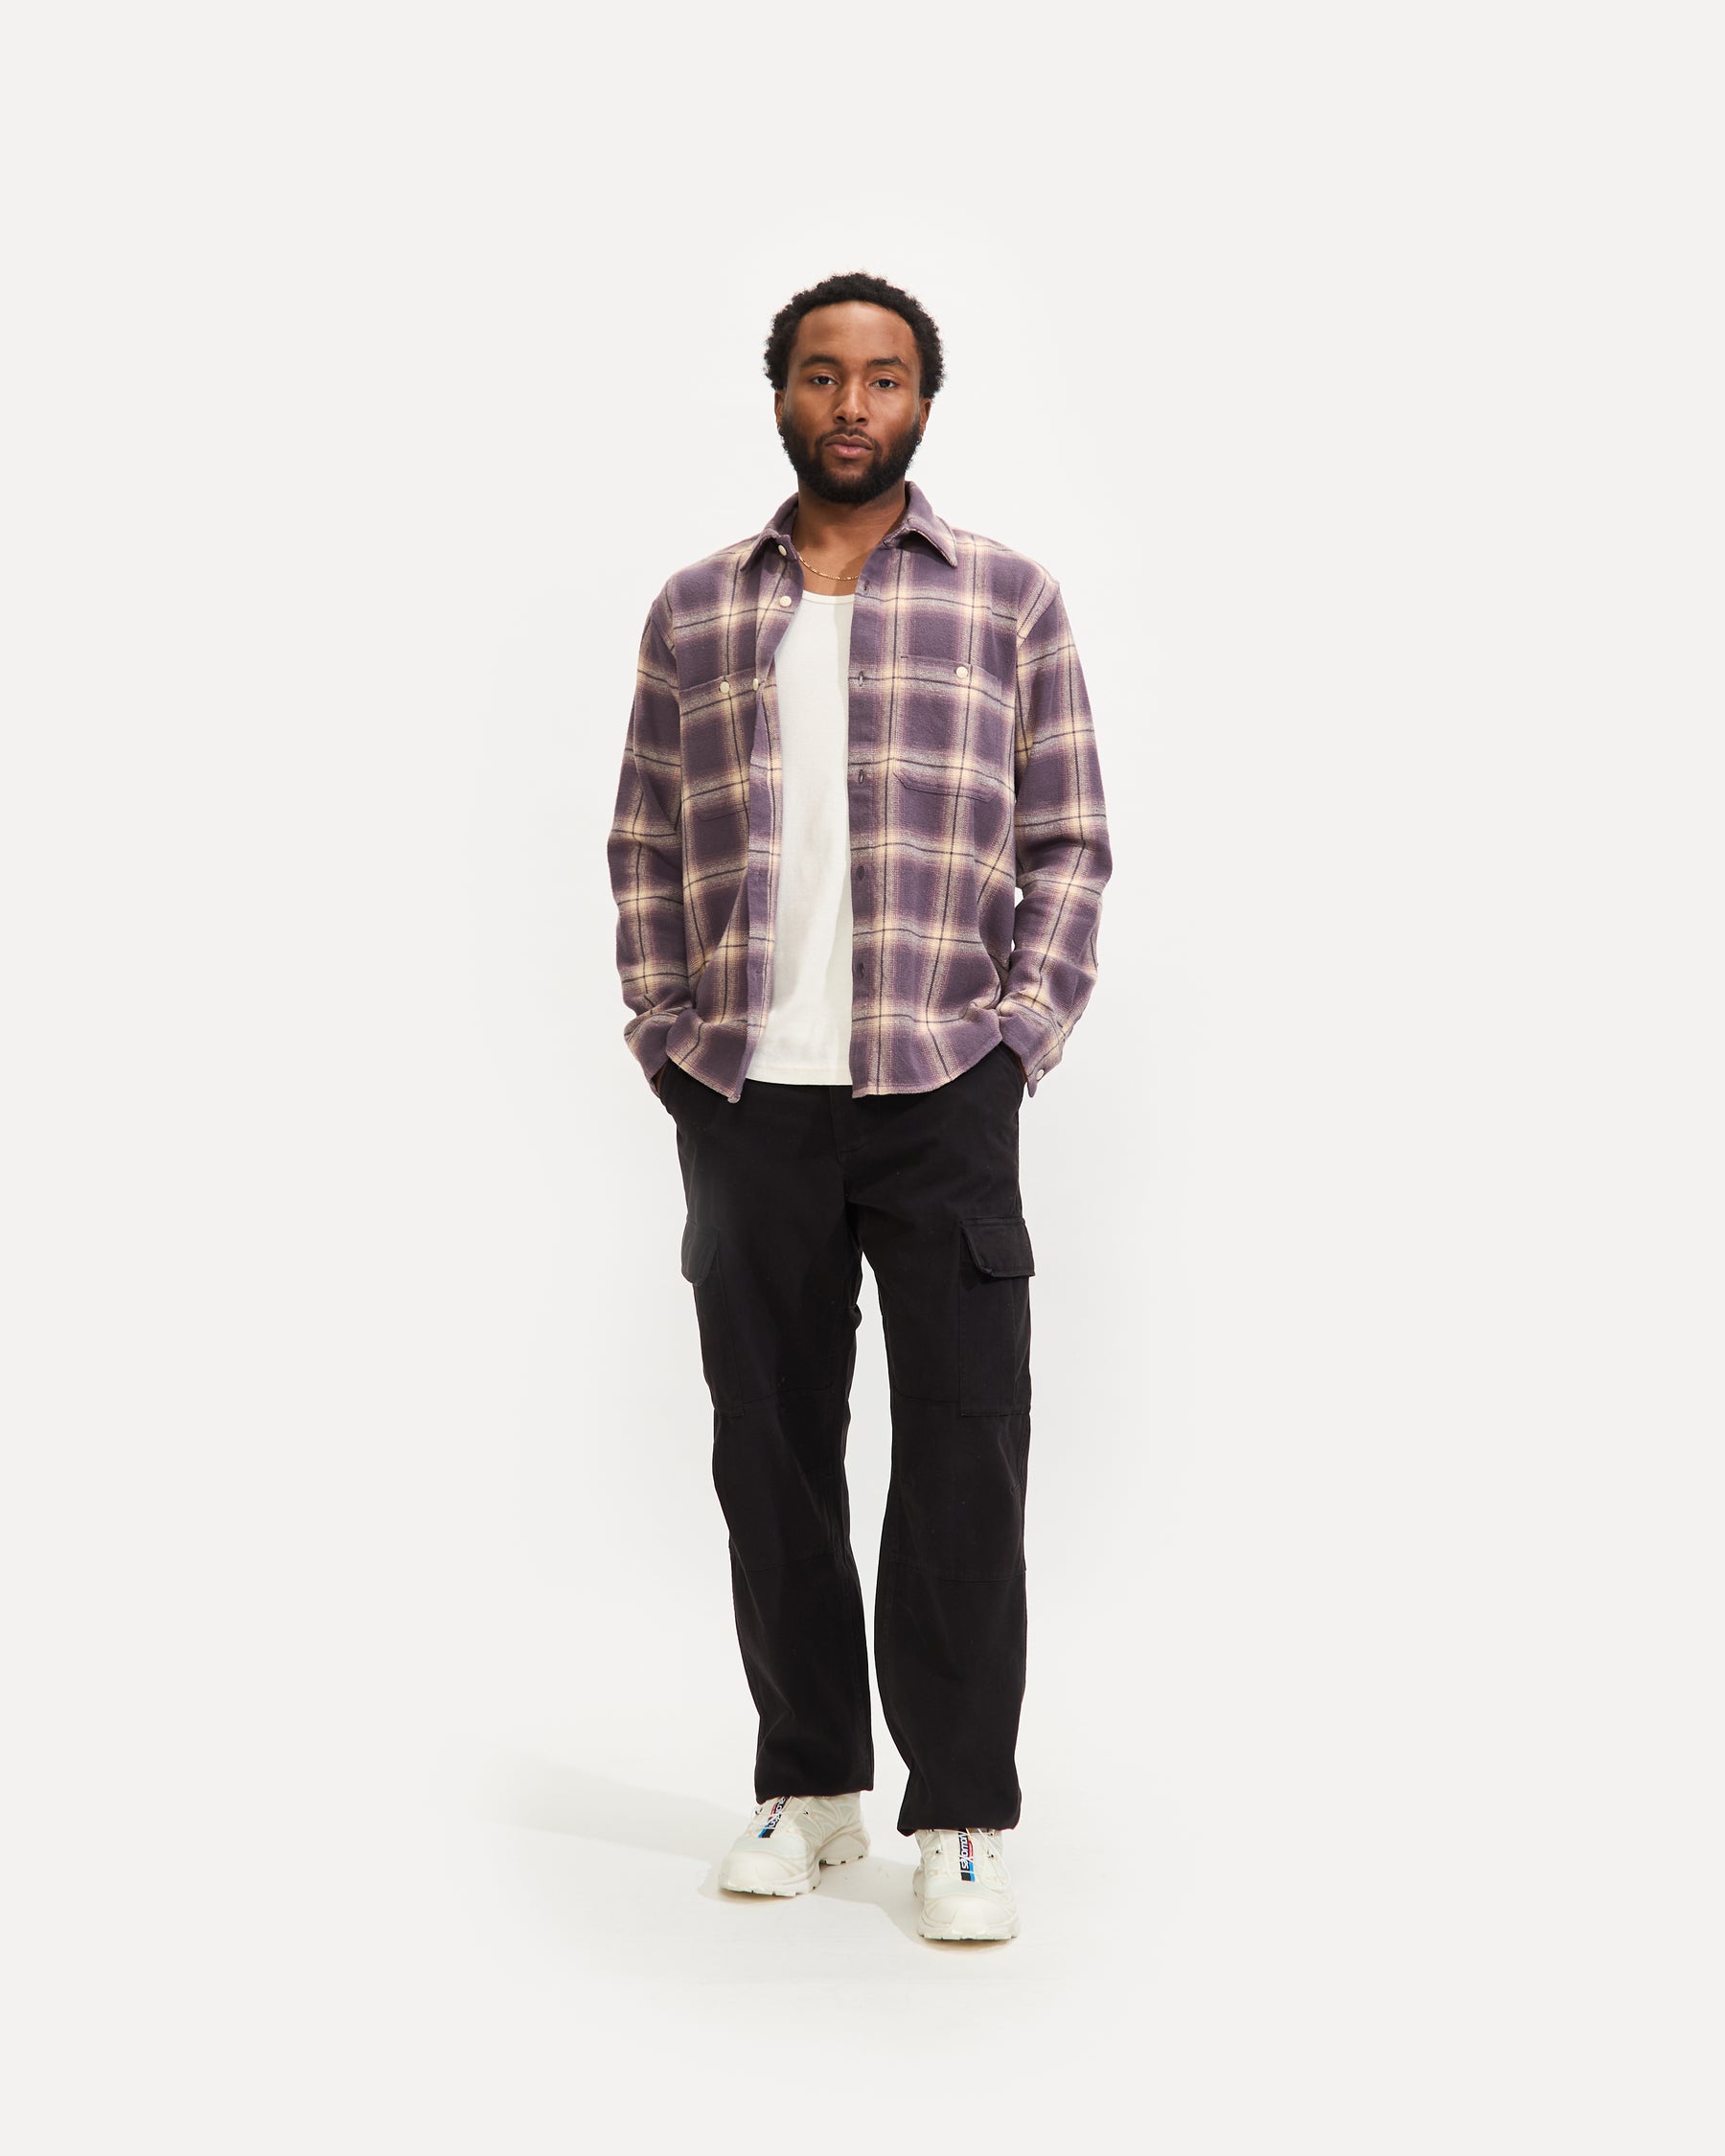 Utility Flannel in Faded Lilac